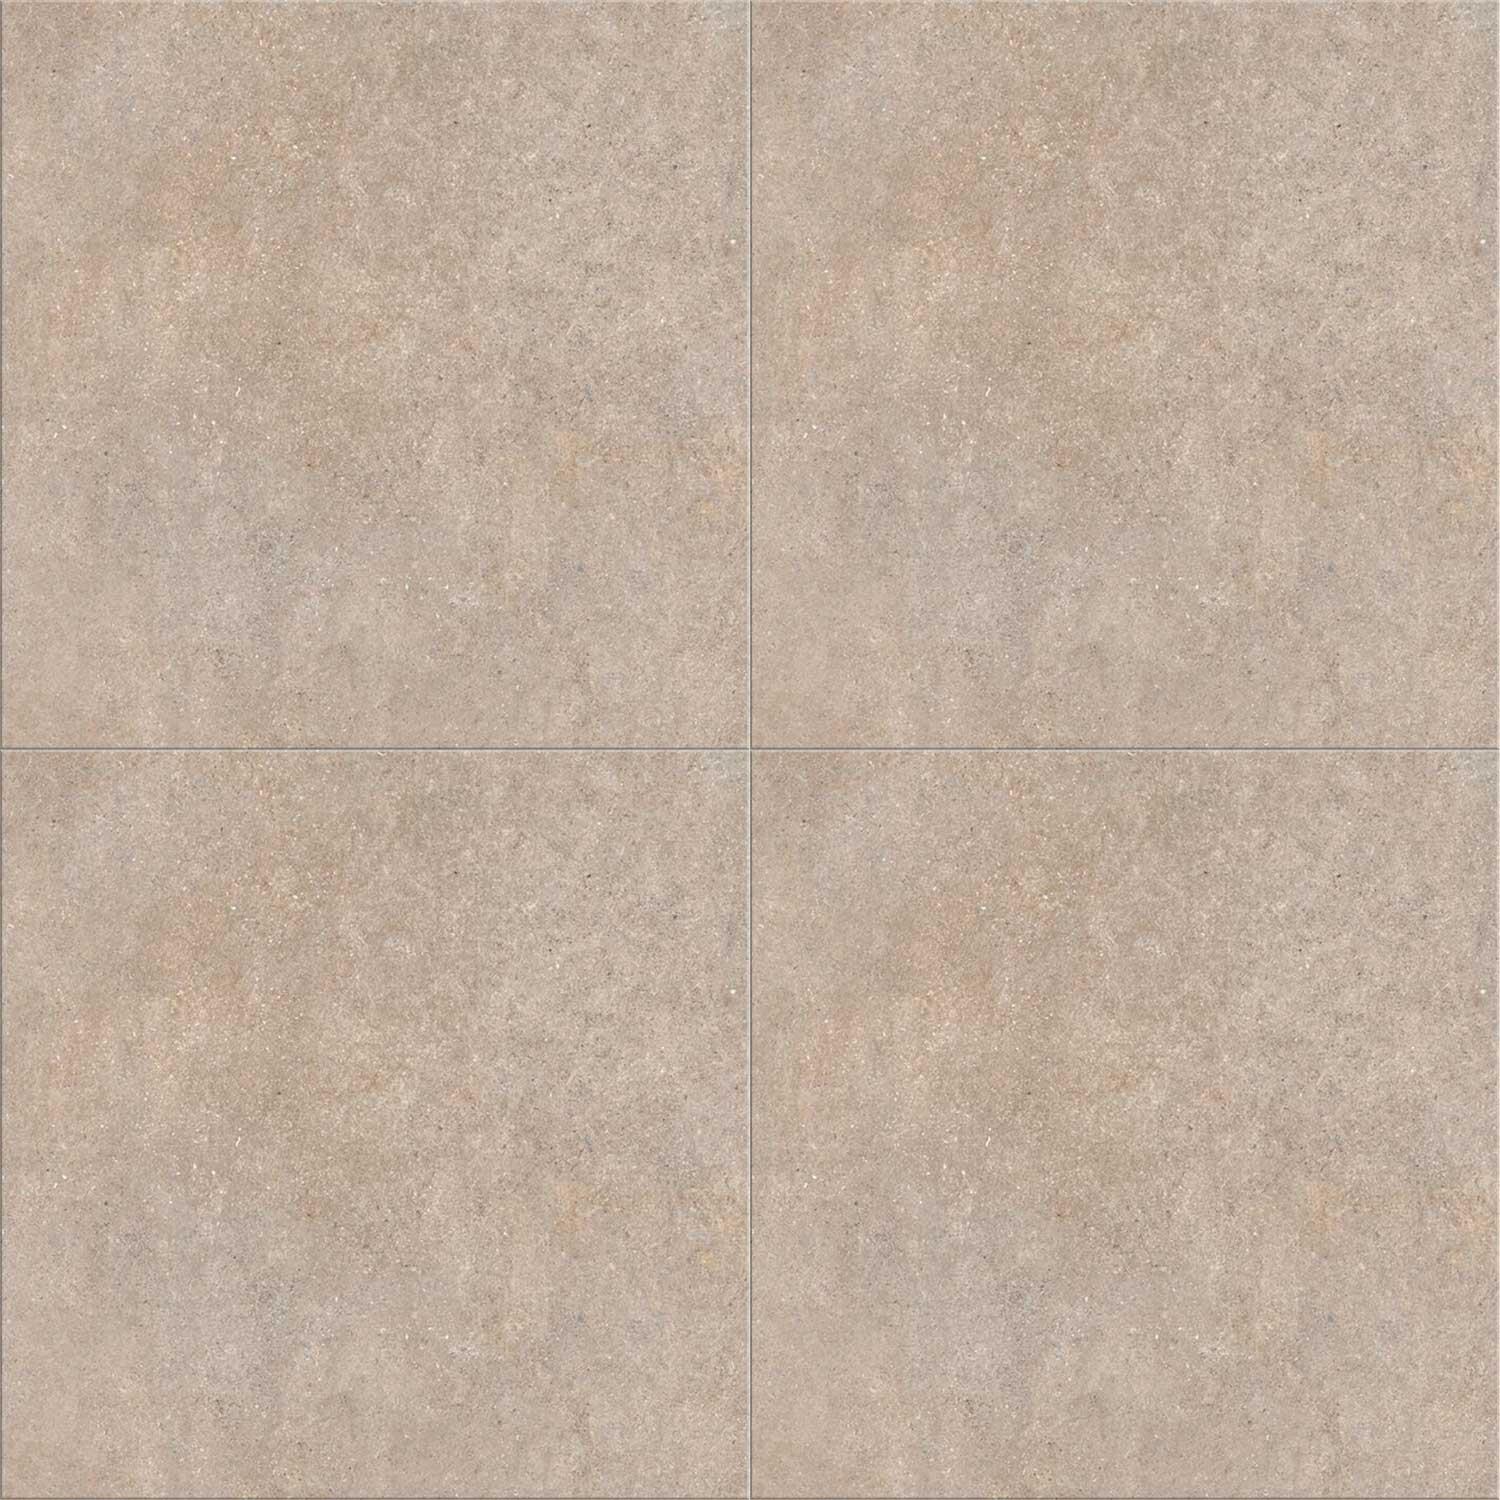 Neolith Brown Porcelain Tile Wall Floor Large Square 595 x 595mm